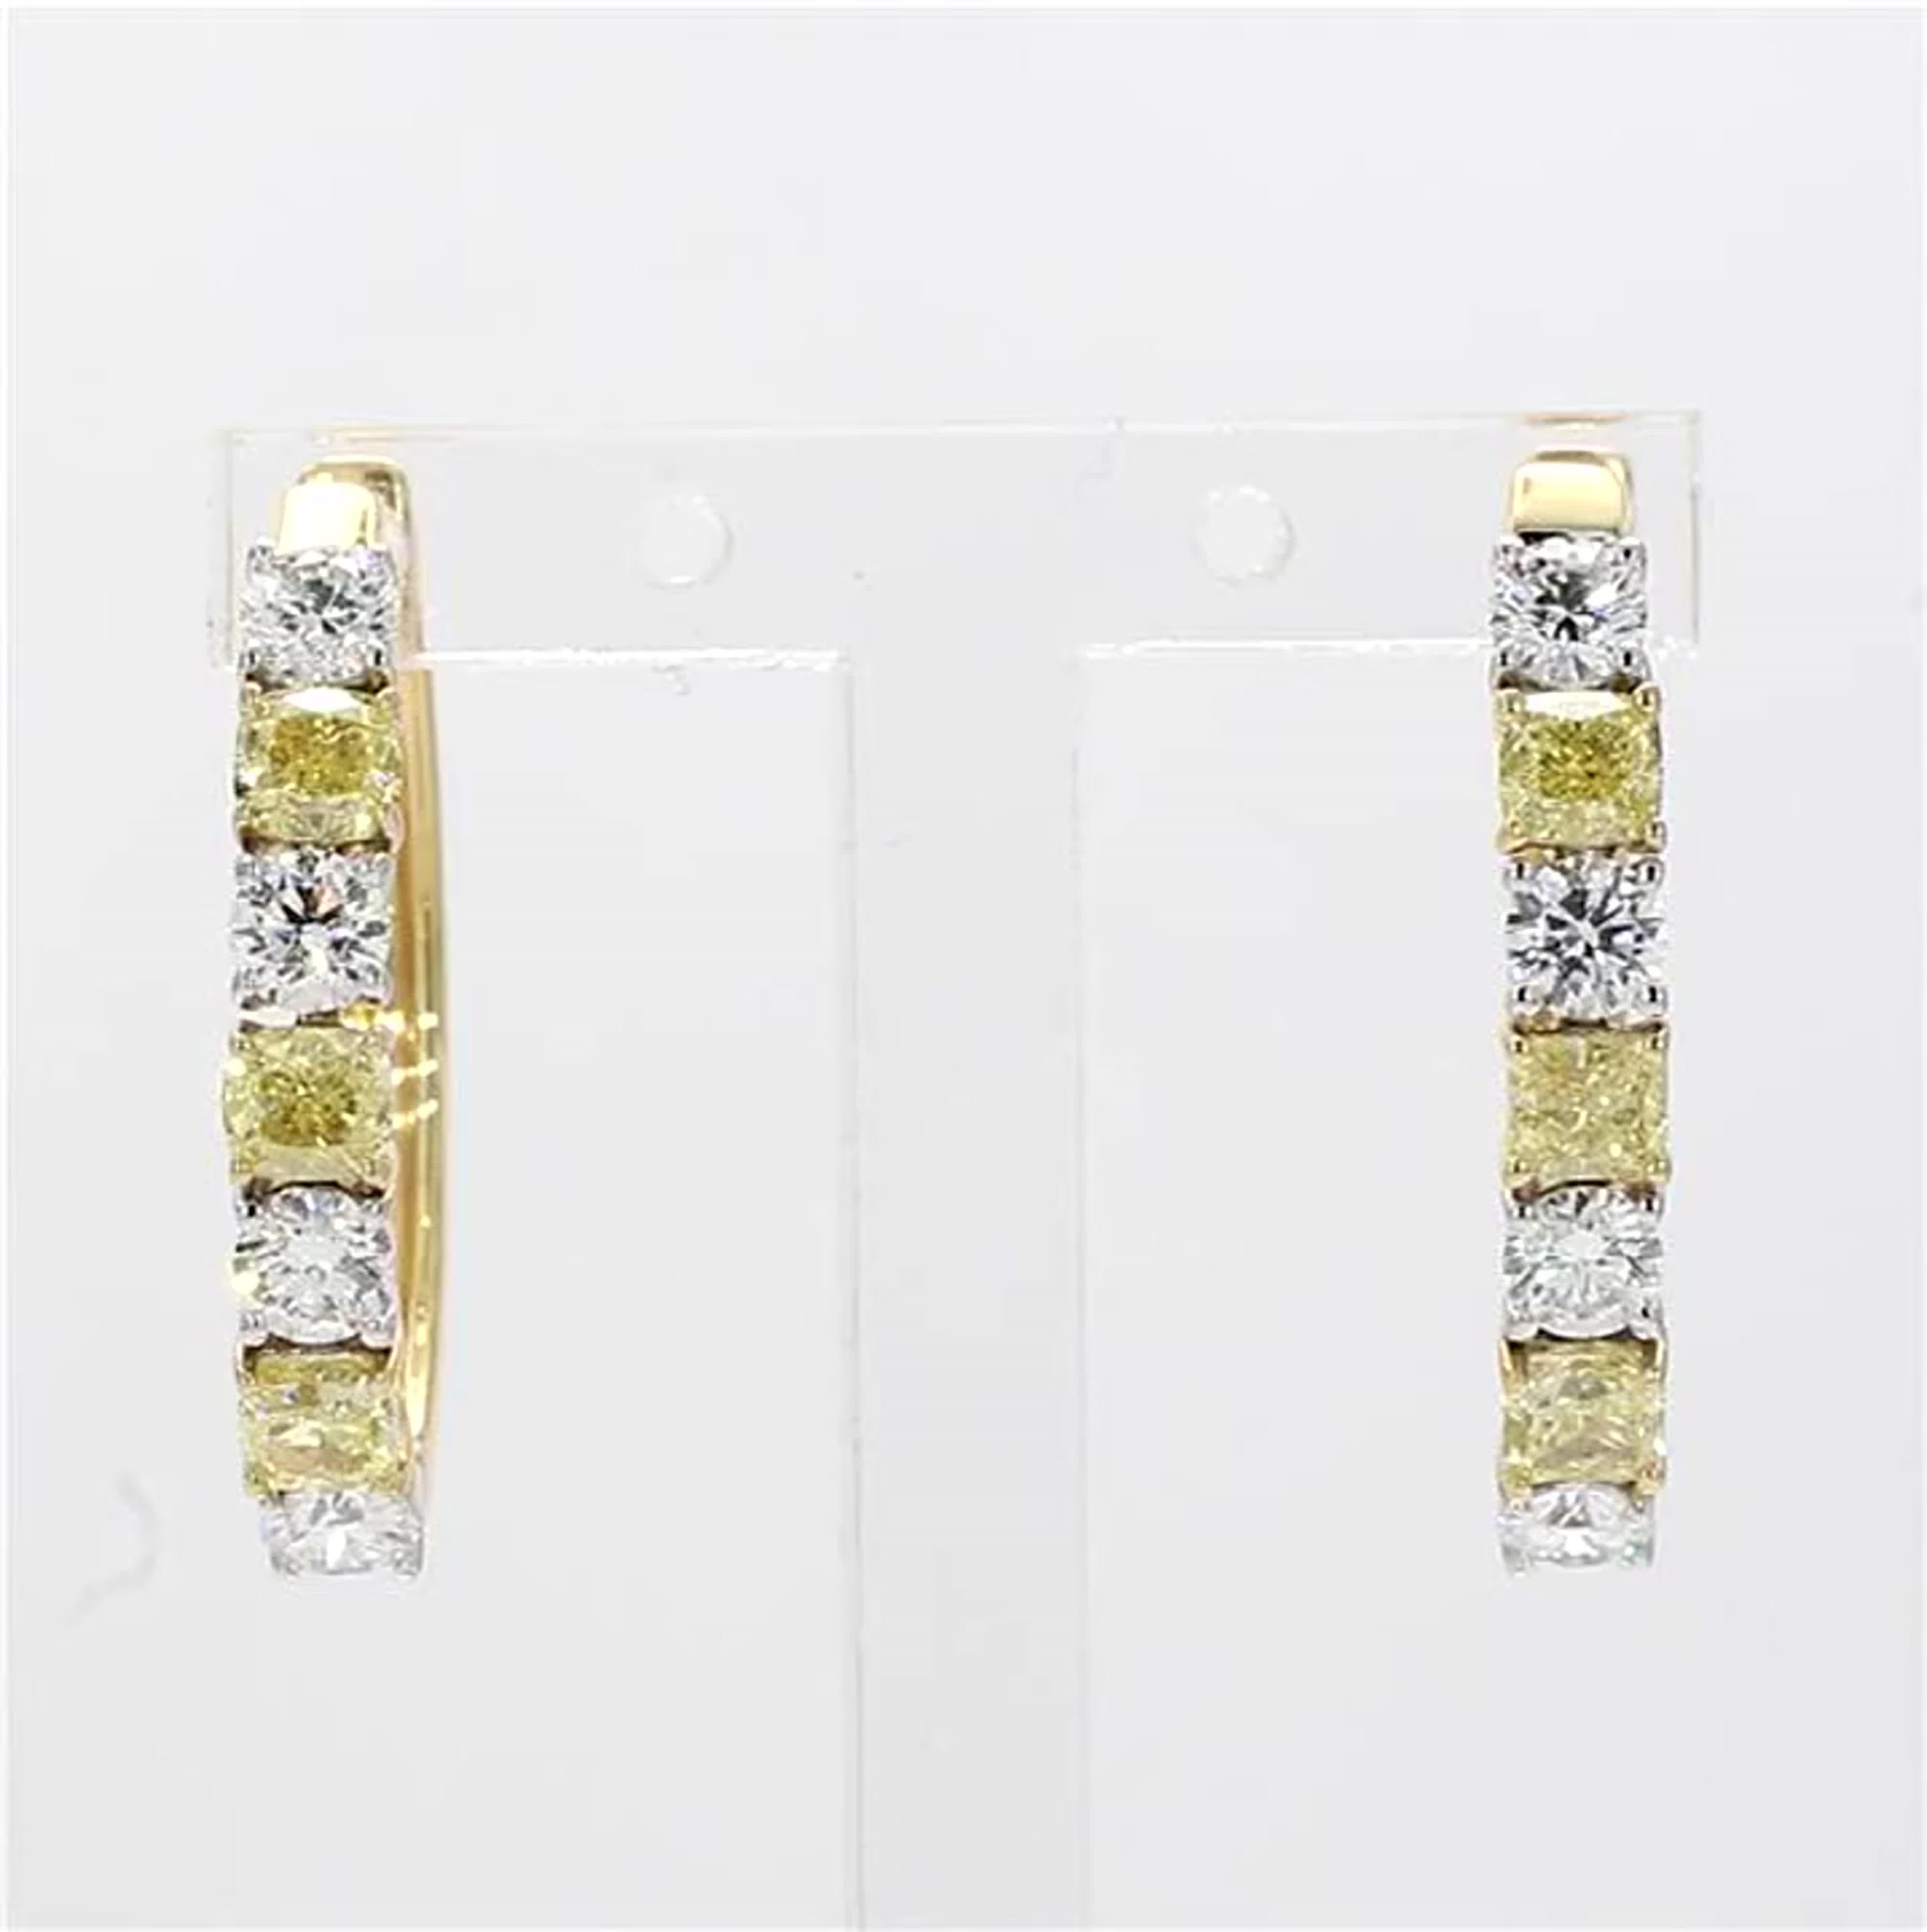 RareGemWorld's classic natural cushion cut yellow diamond earrings. Mounted in a beautiful 18K Yellow and White Gold setting with natural cushion cut yellow diamonds. The yellow diamonds are surrounded by small round natural white diamonds. These